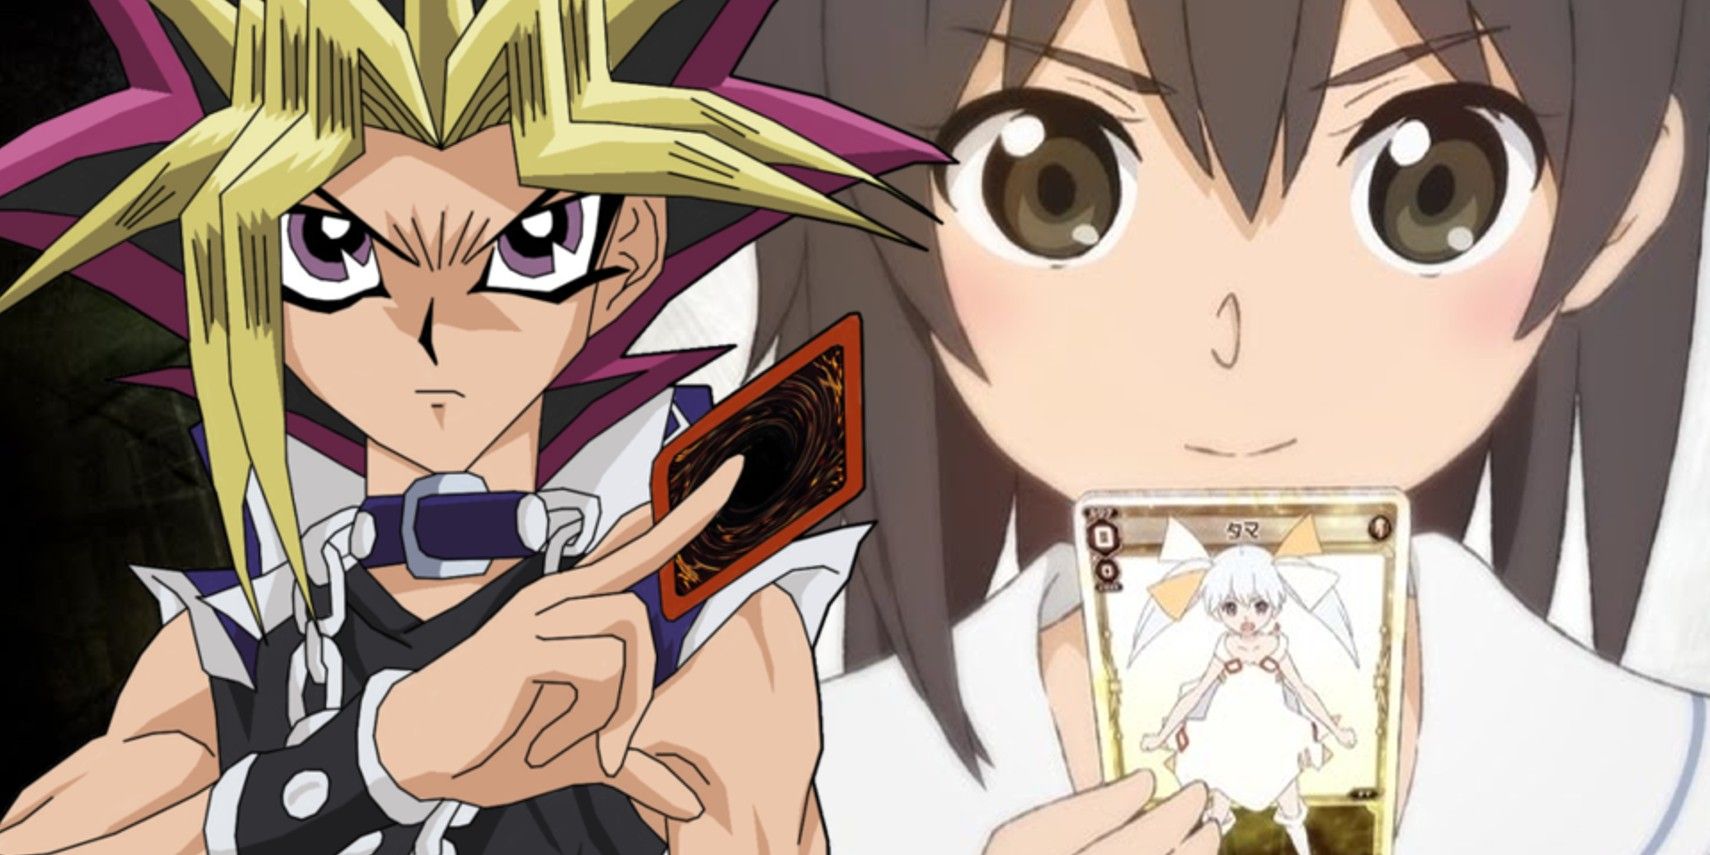 Upcoming Australian-made card game battle anime is a confusing mix